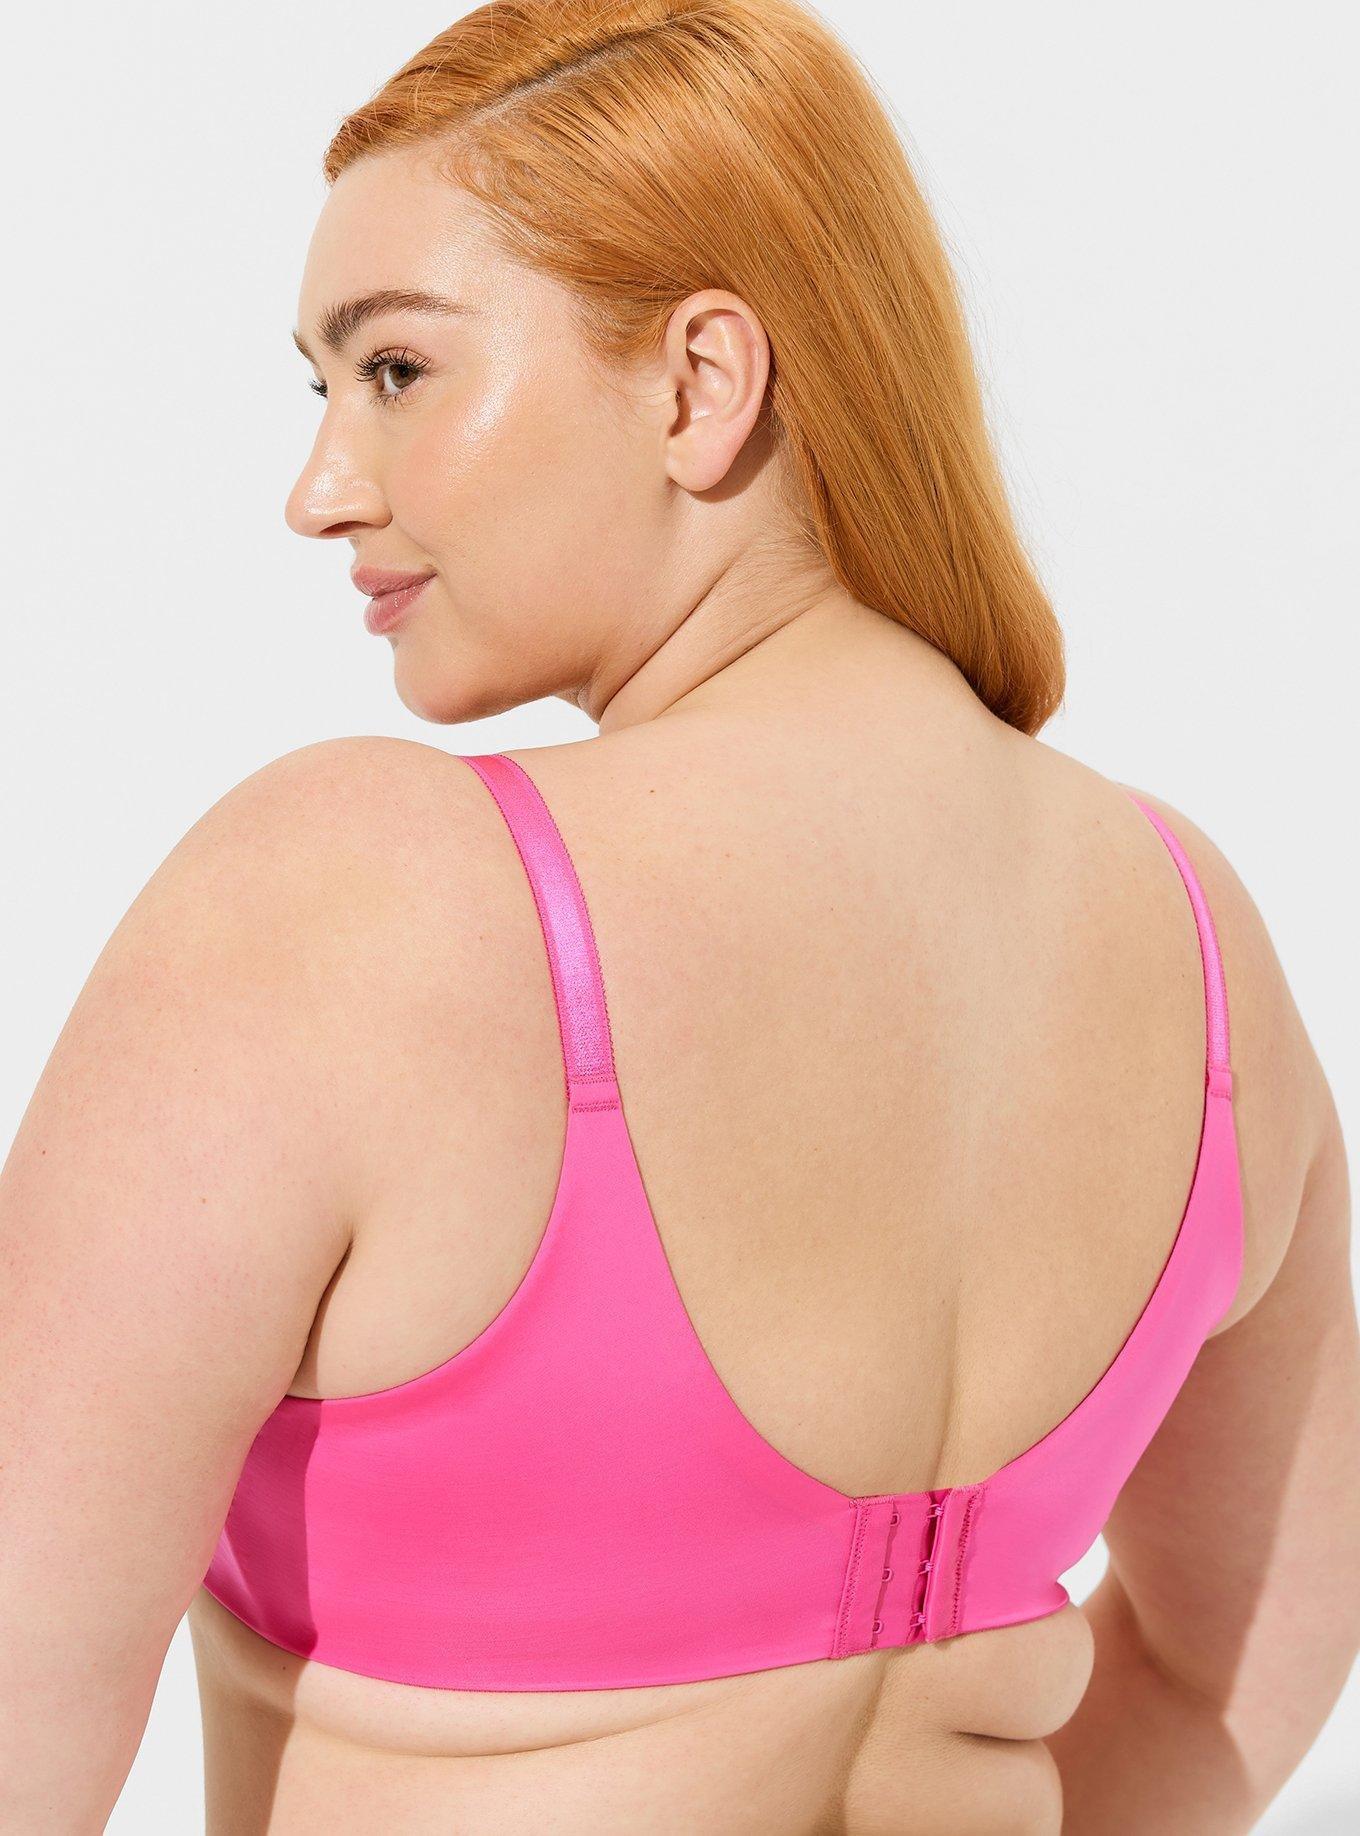 Cacique Plus Size T-Shirt Bra - Lightly Lined Wireless Pullover